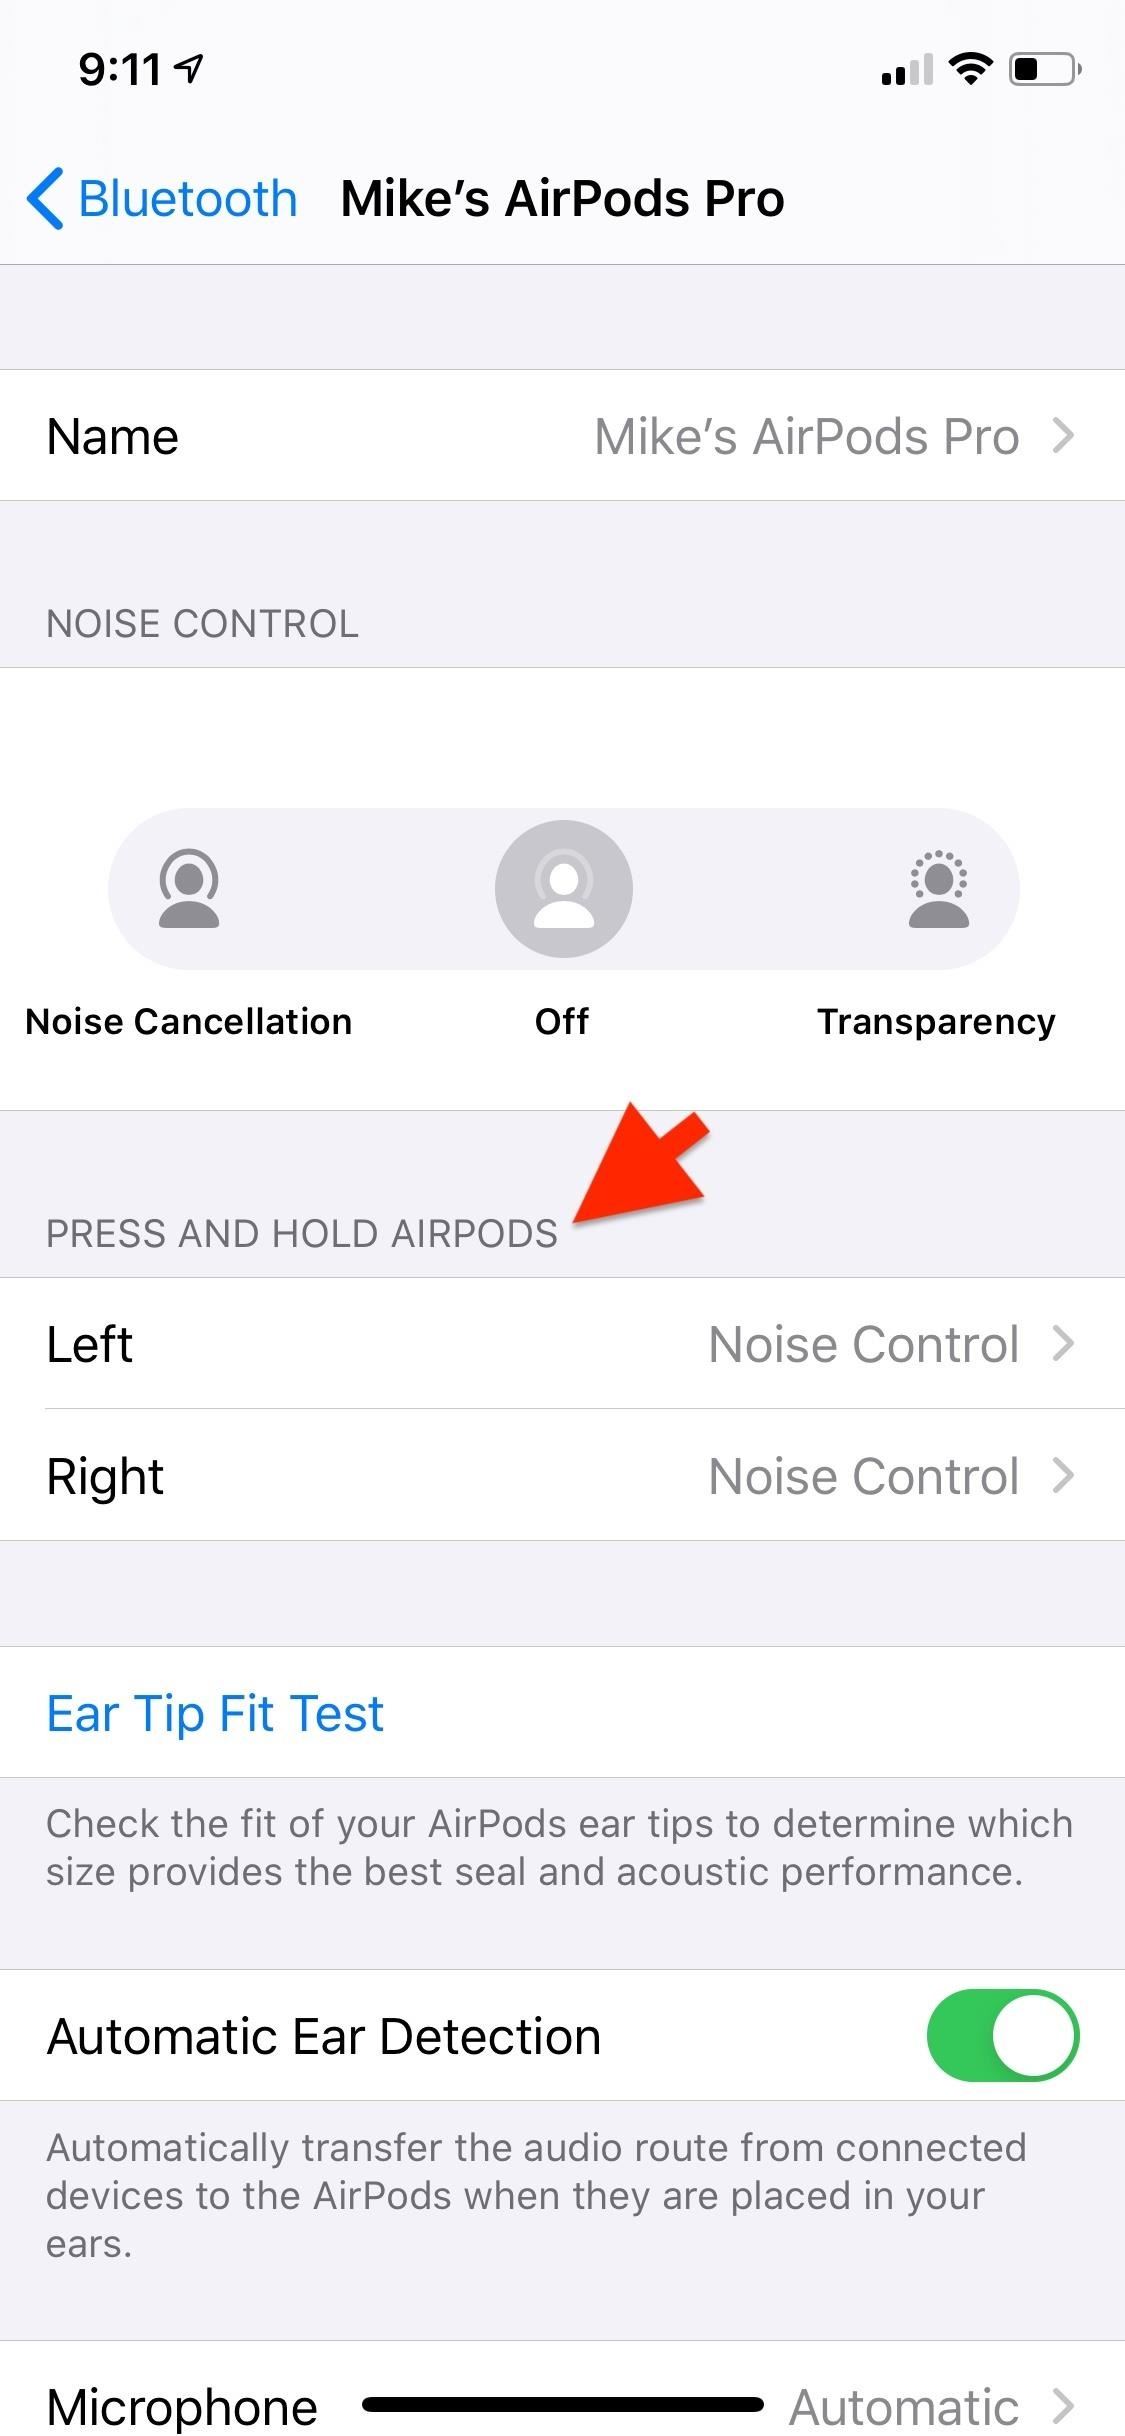 How to Customize Your AirPods' Double-Tap or Long-Press Gestures to Make Them More Useful